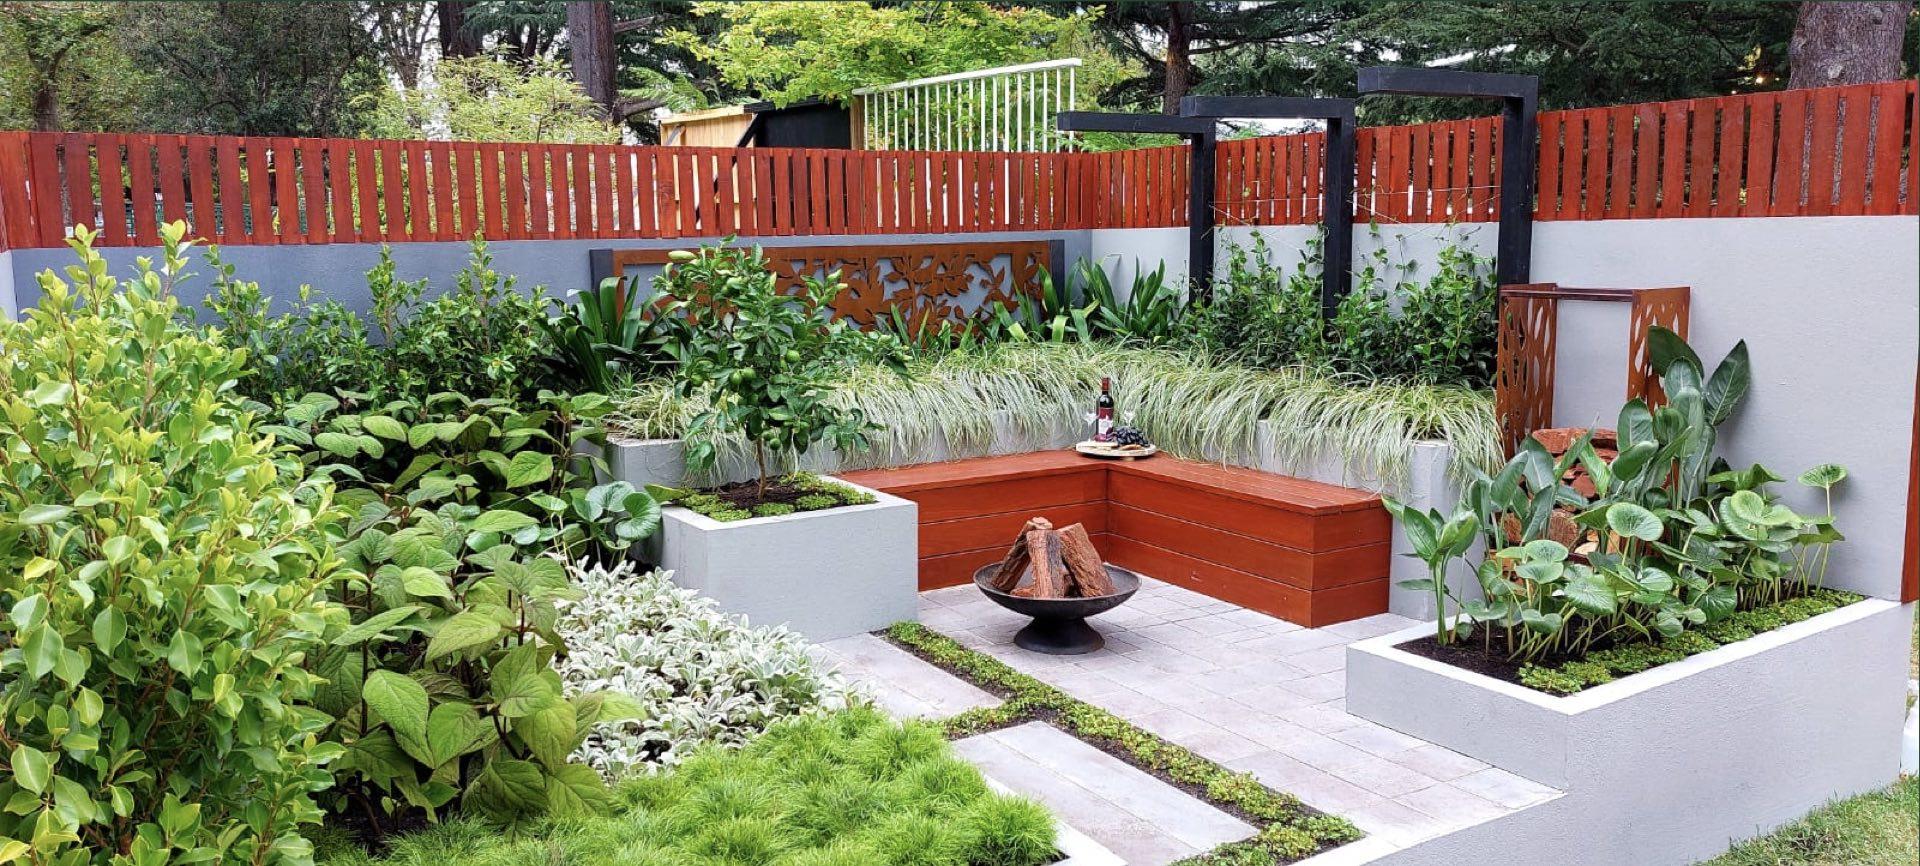 Why Should Commercial Properties Go With Expert Landscape Designers...